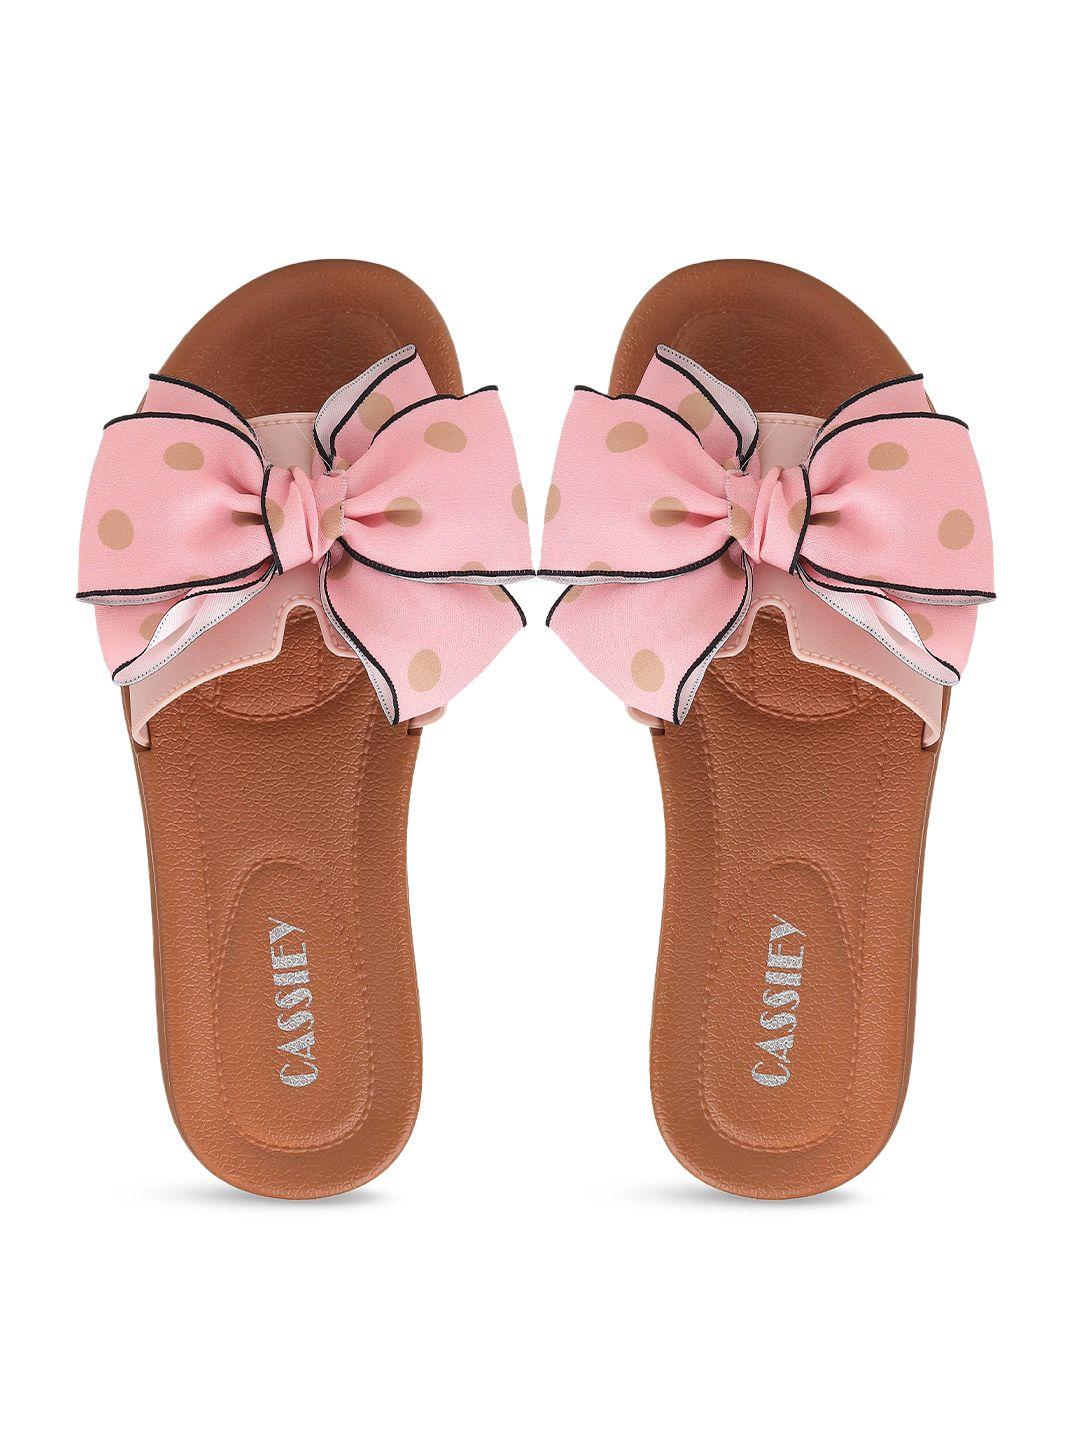 cassiey women printed comfortable rubber sliders with bows